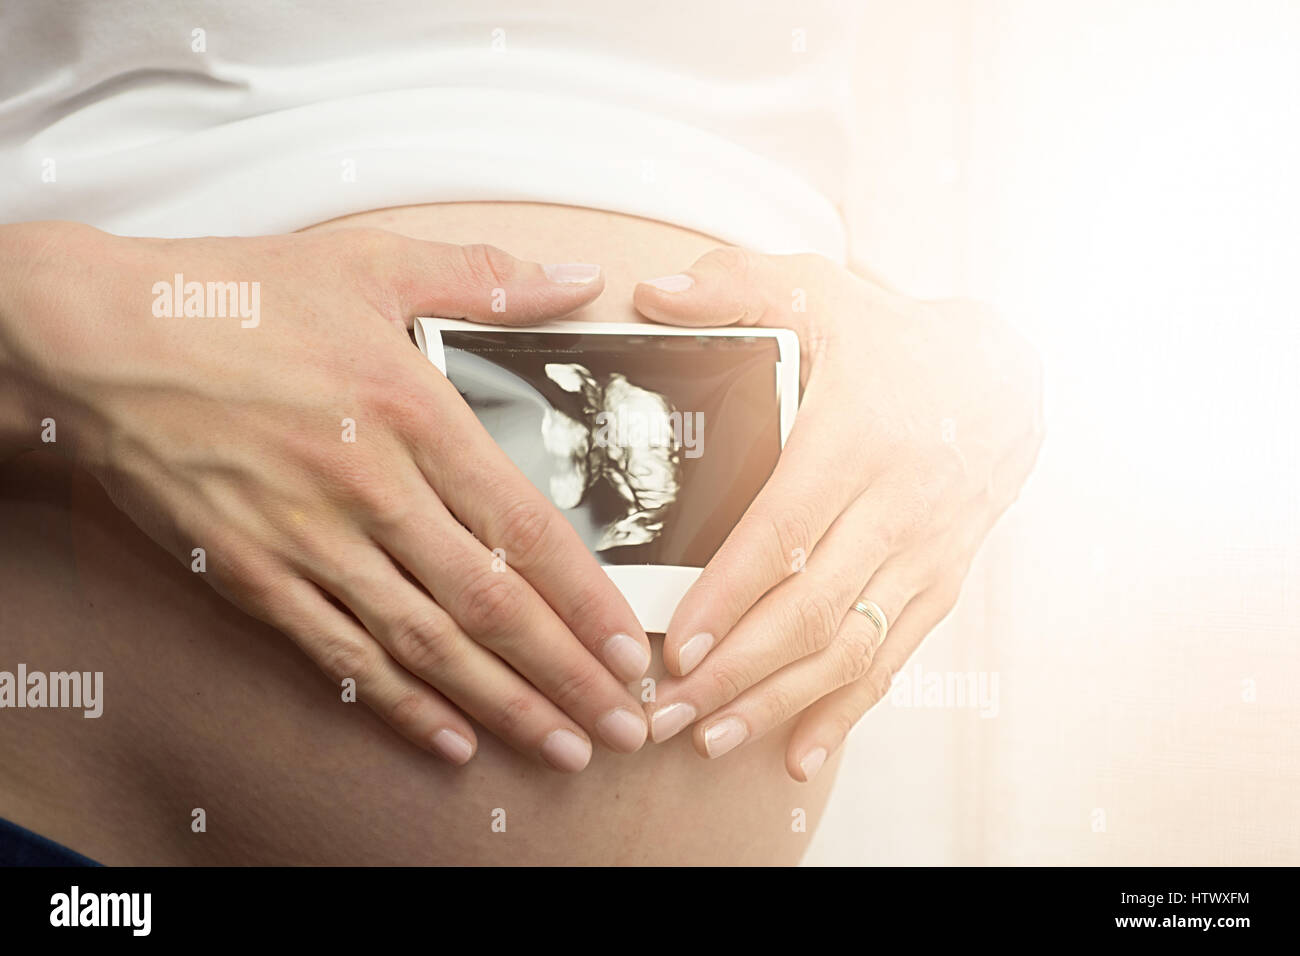 Pregnant woman holding ultrasound scan on her tummy. Stock Photo